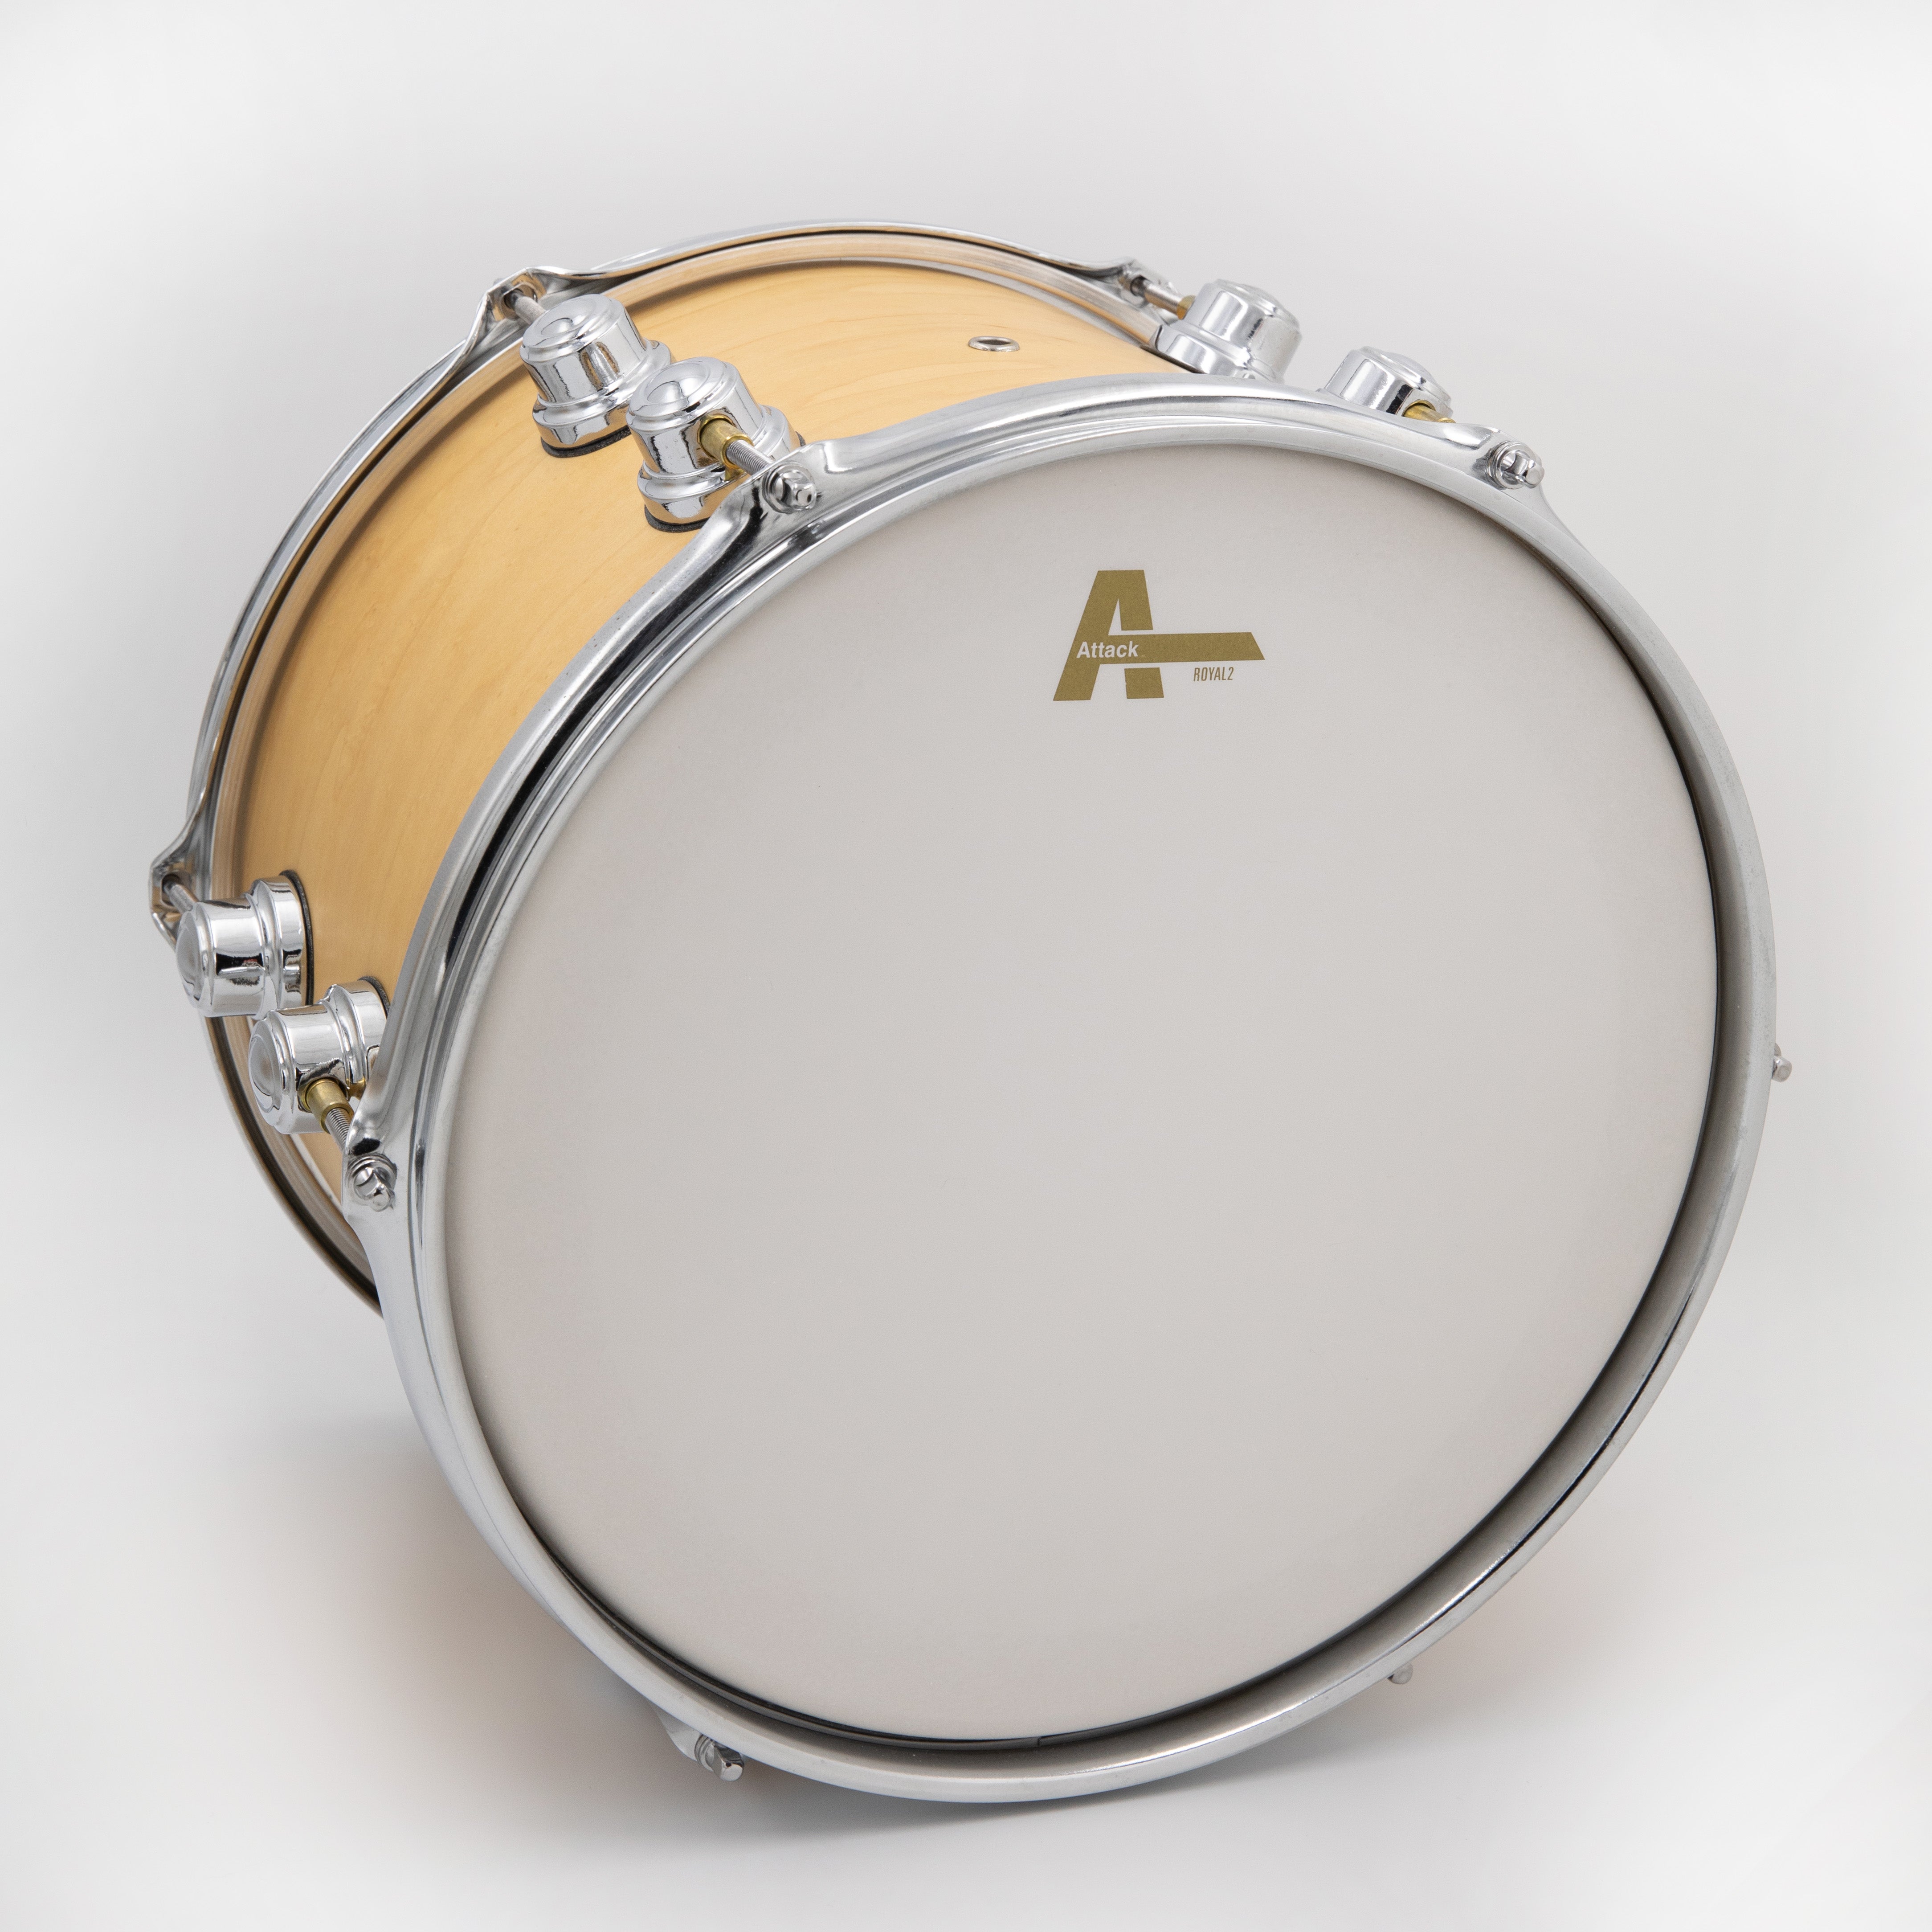 Attack Royal 1 13" 1-Ply Medium S Film Drumhead - Coated